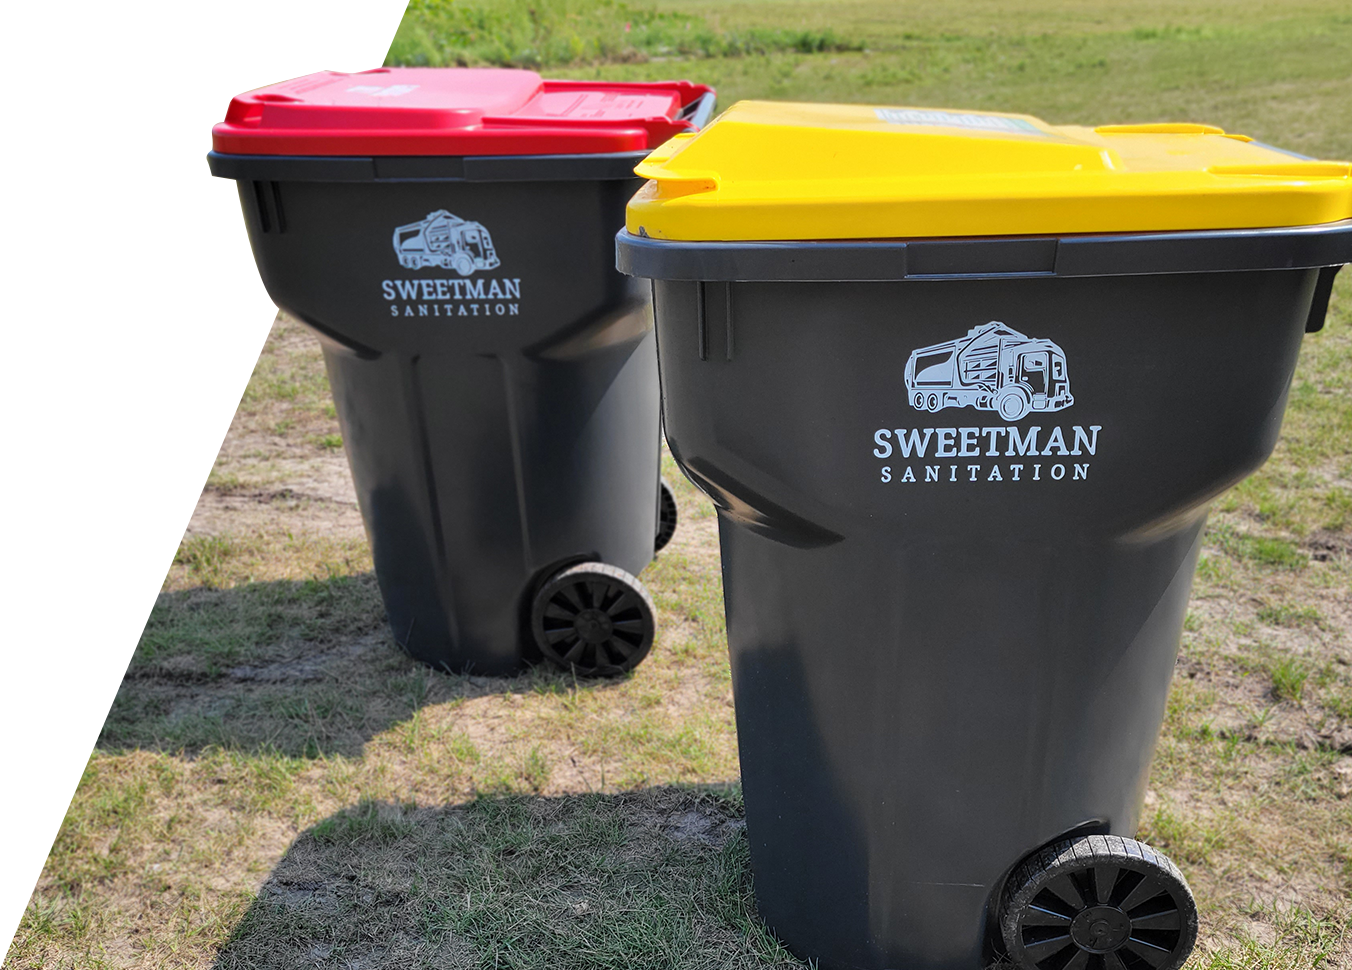 Two trash cans on wheels in a field.